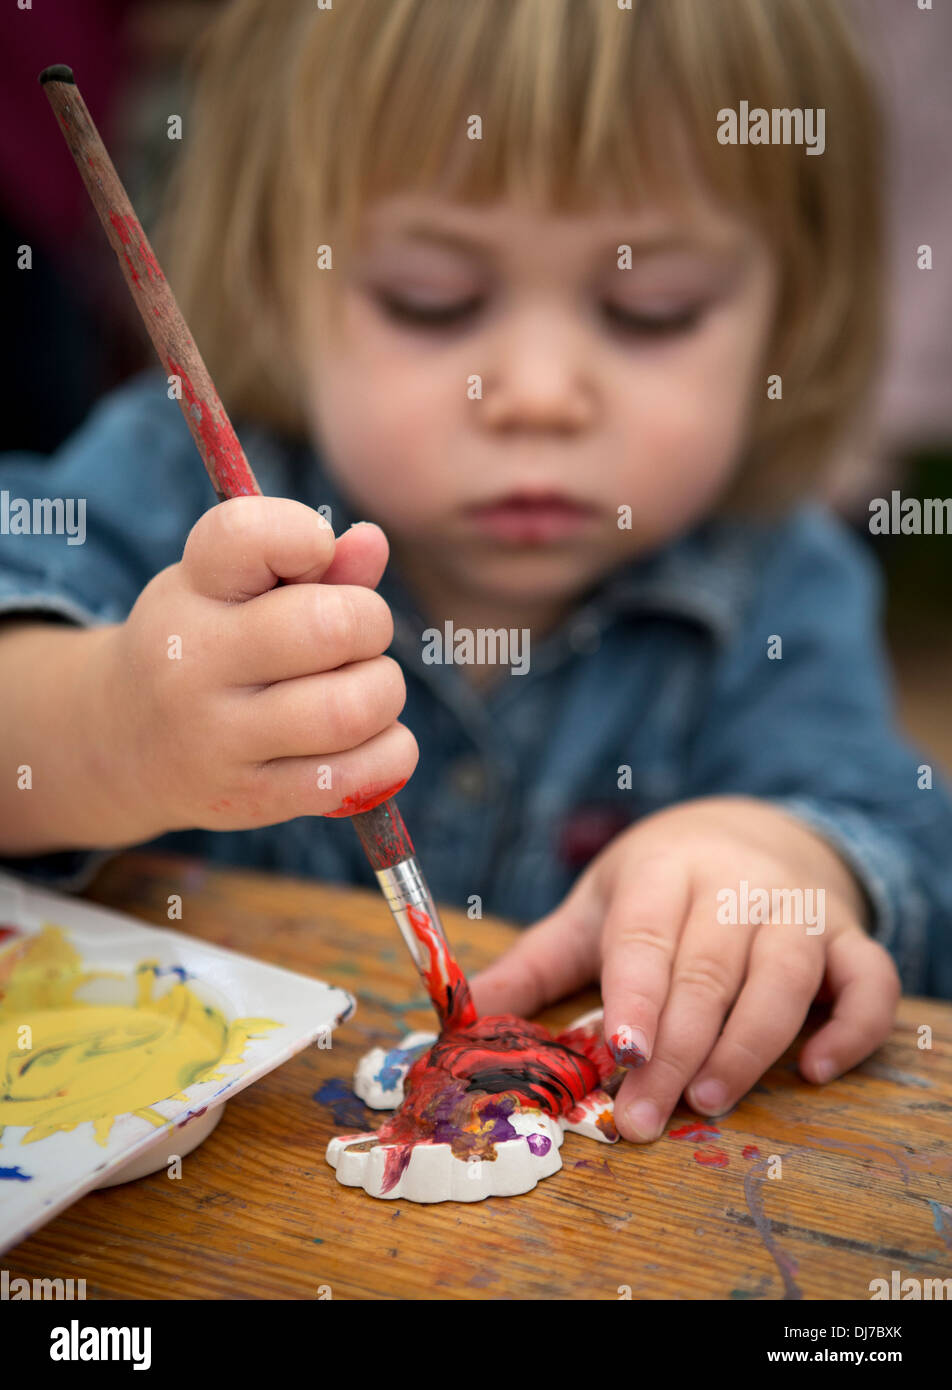 A small child painting a ceramic fridge magnet Stock Photo